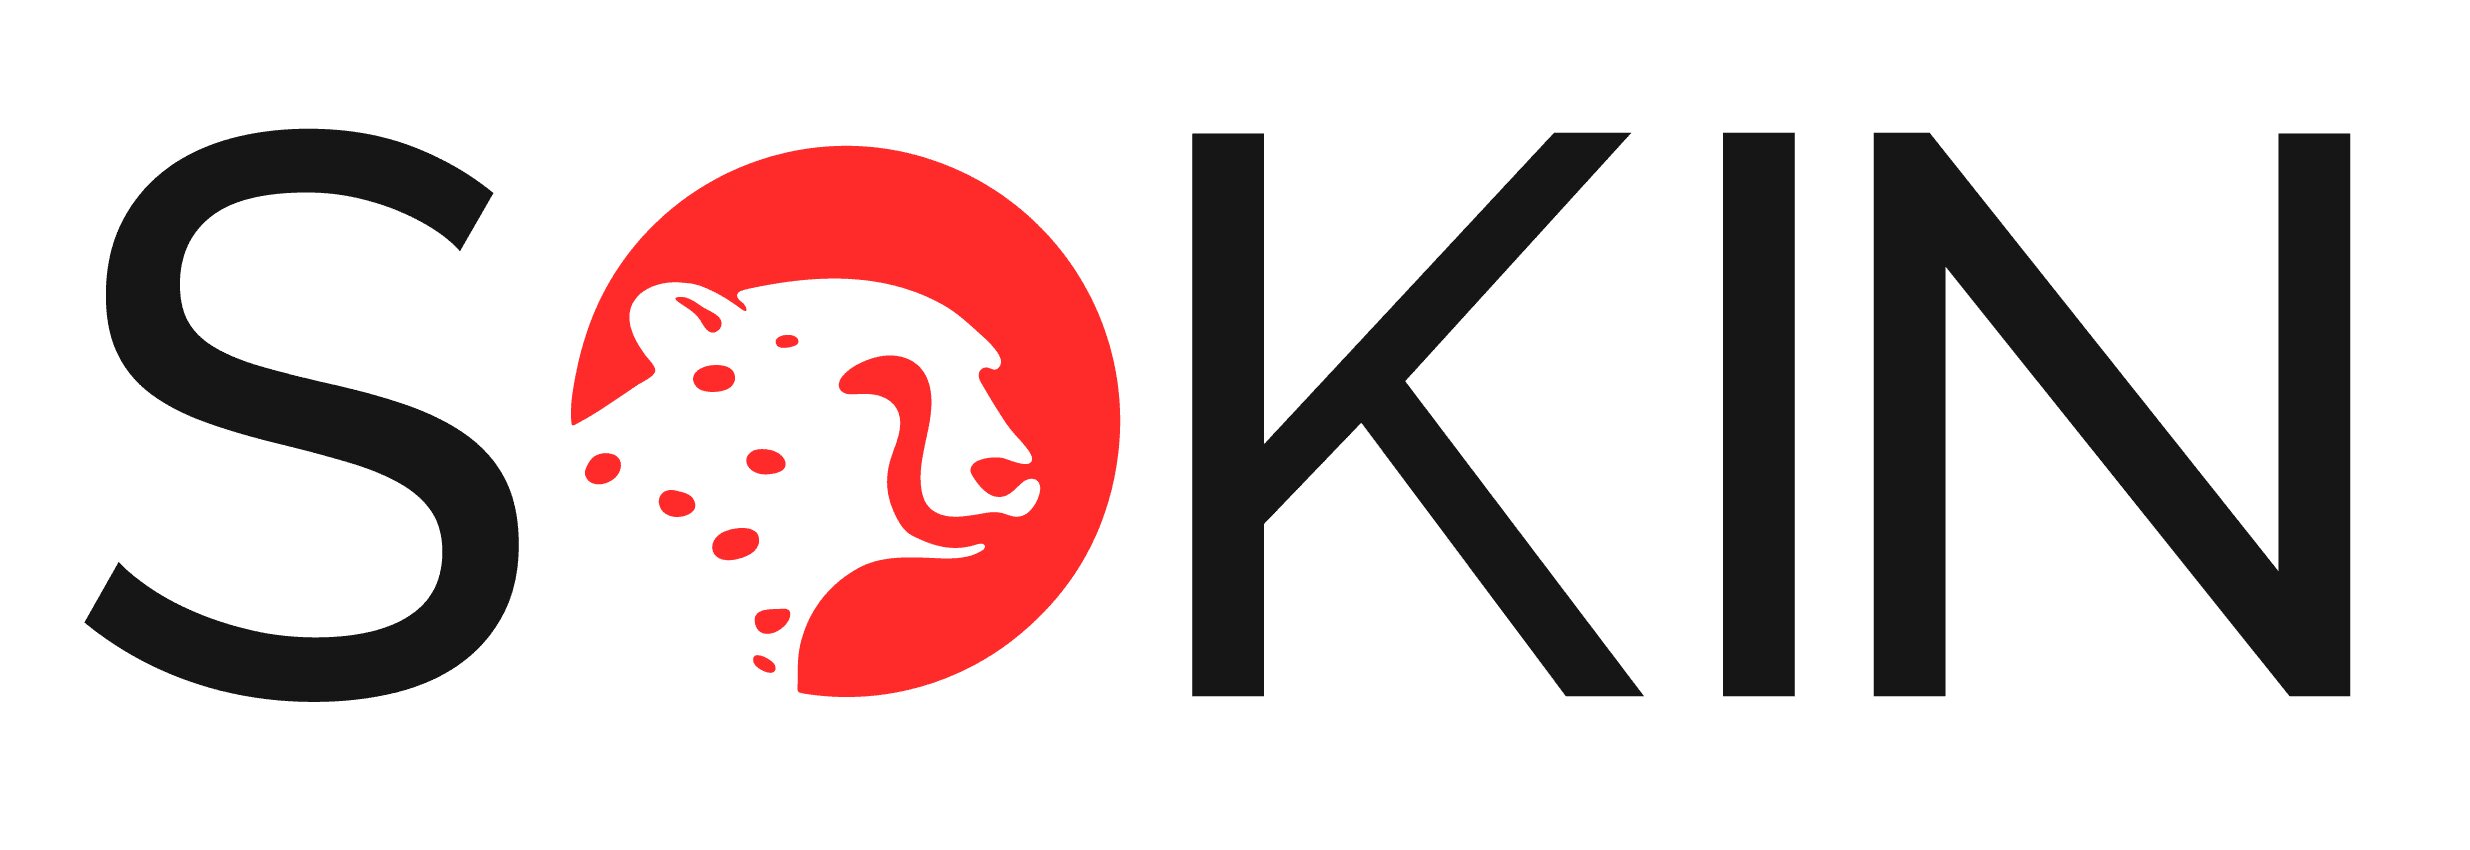 Sokin Inks Deal With Mastercard in Europe